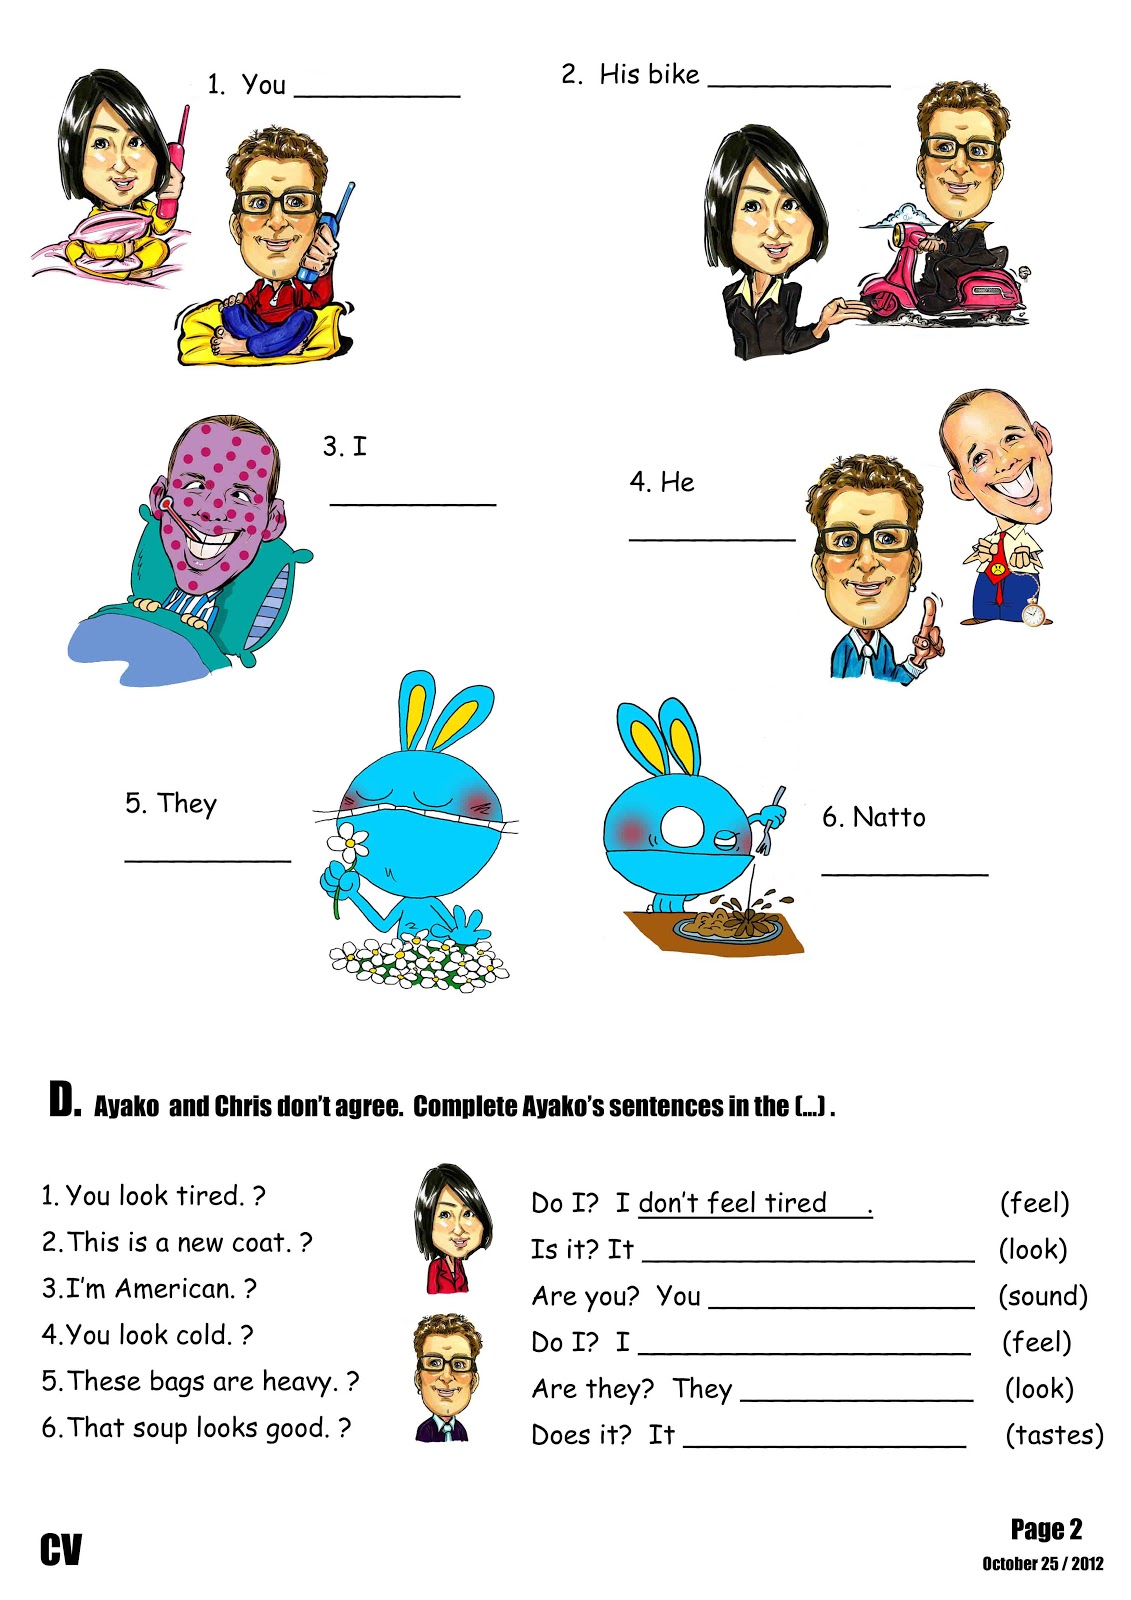 15-best-images-of-nouns-and-adjectives-worksheets-identifying-nouns-verbs-adjectives